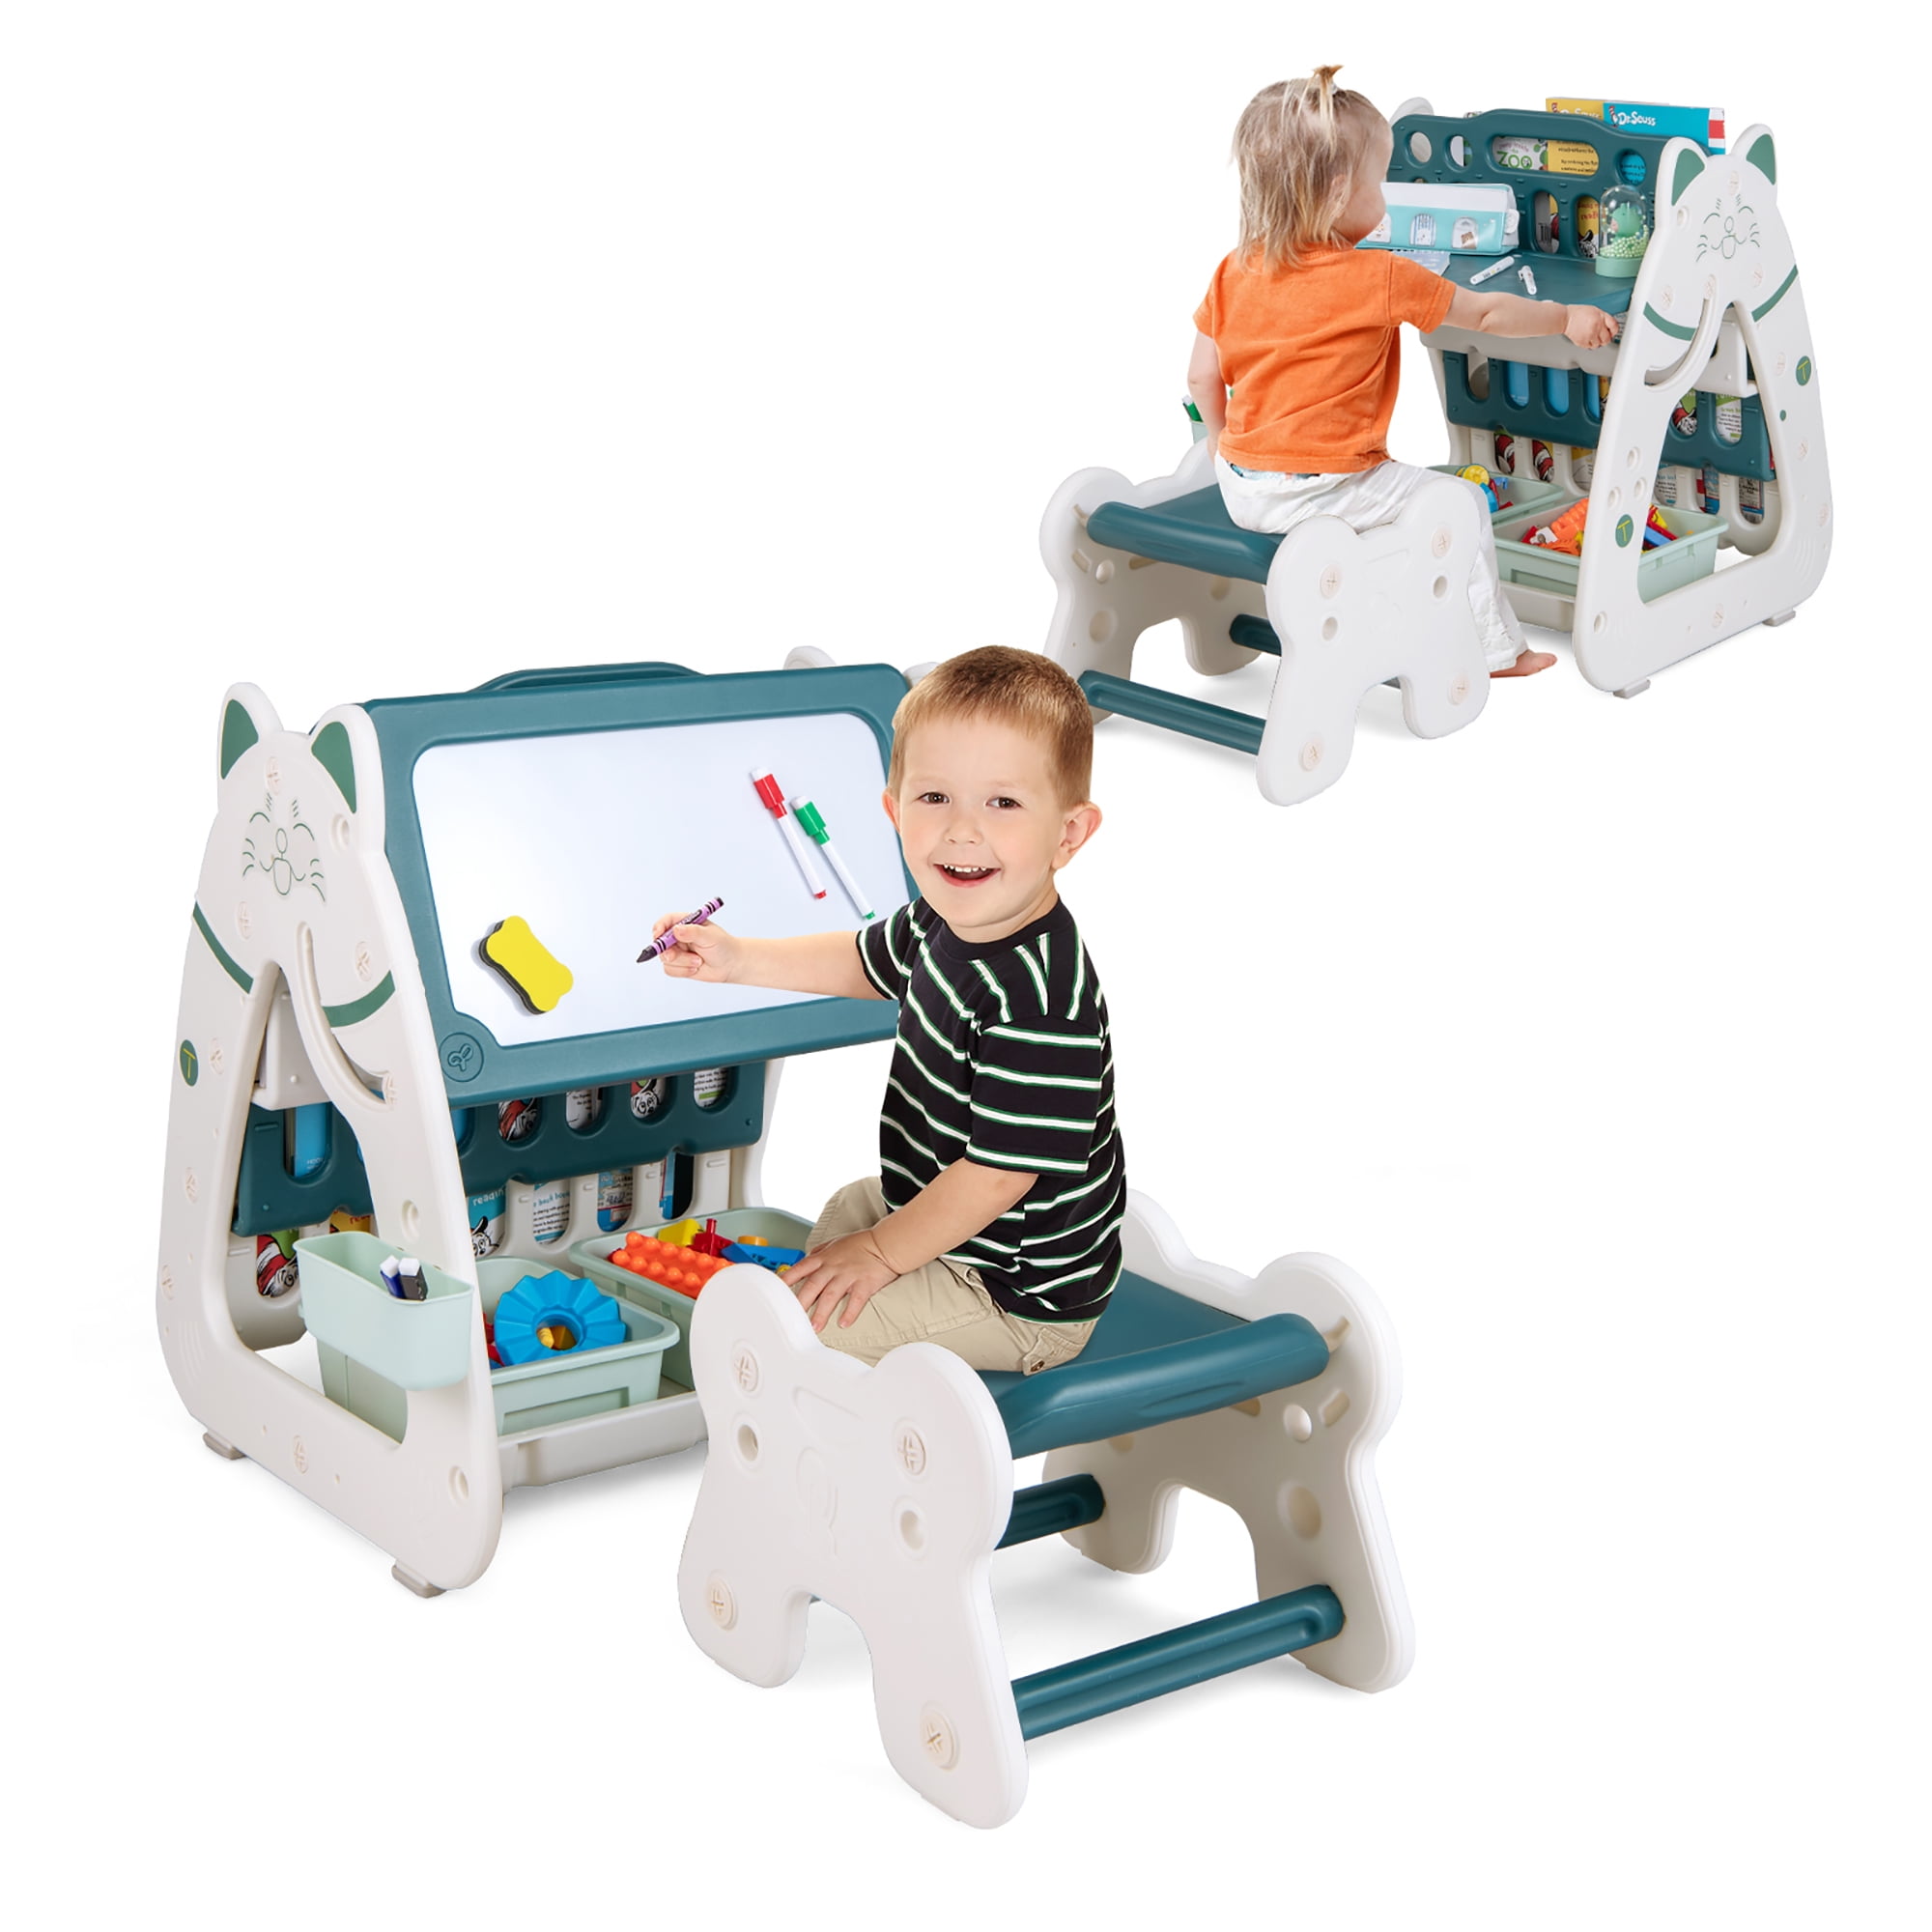 Costway Toddler Craft Table & Chair Set Kids Art Crafts Table withPaper Roll Holder White